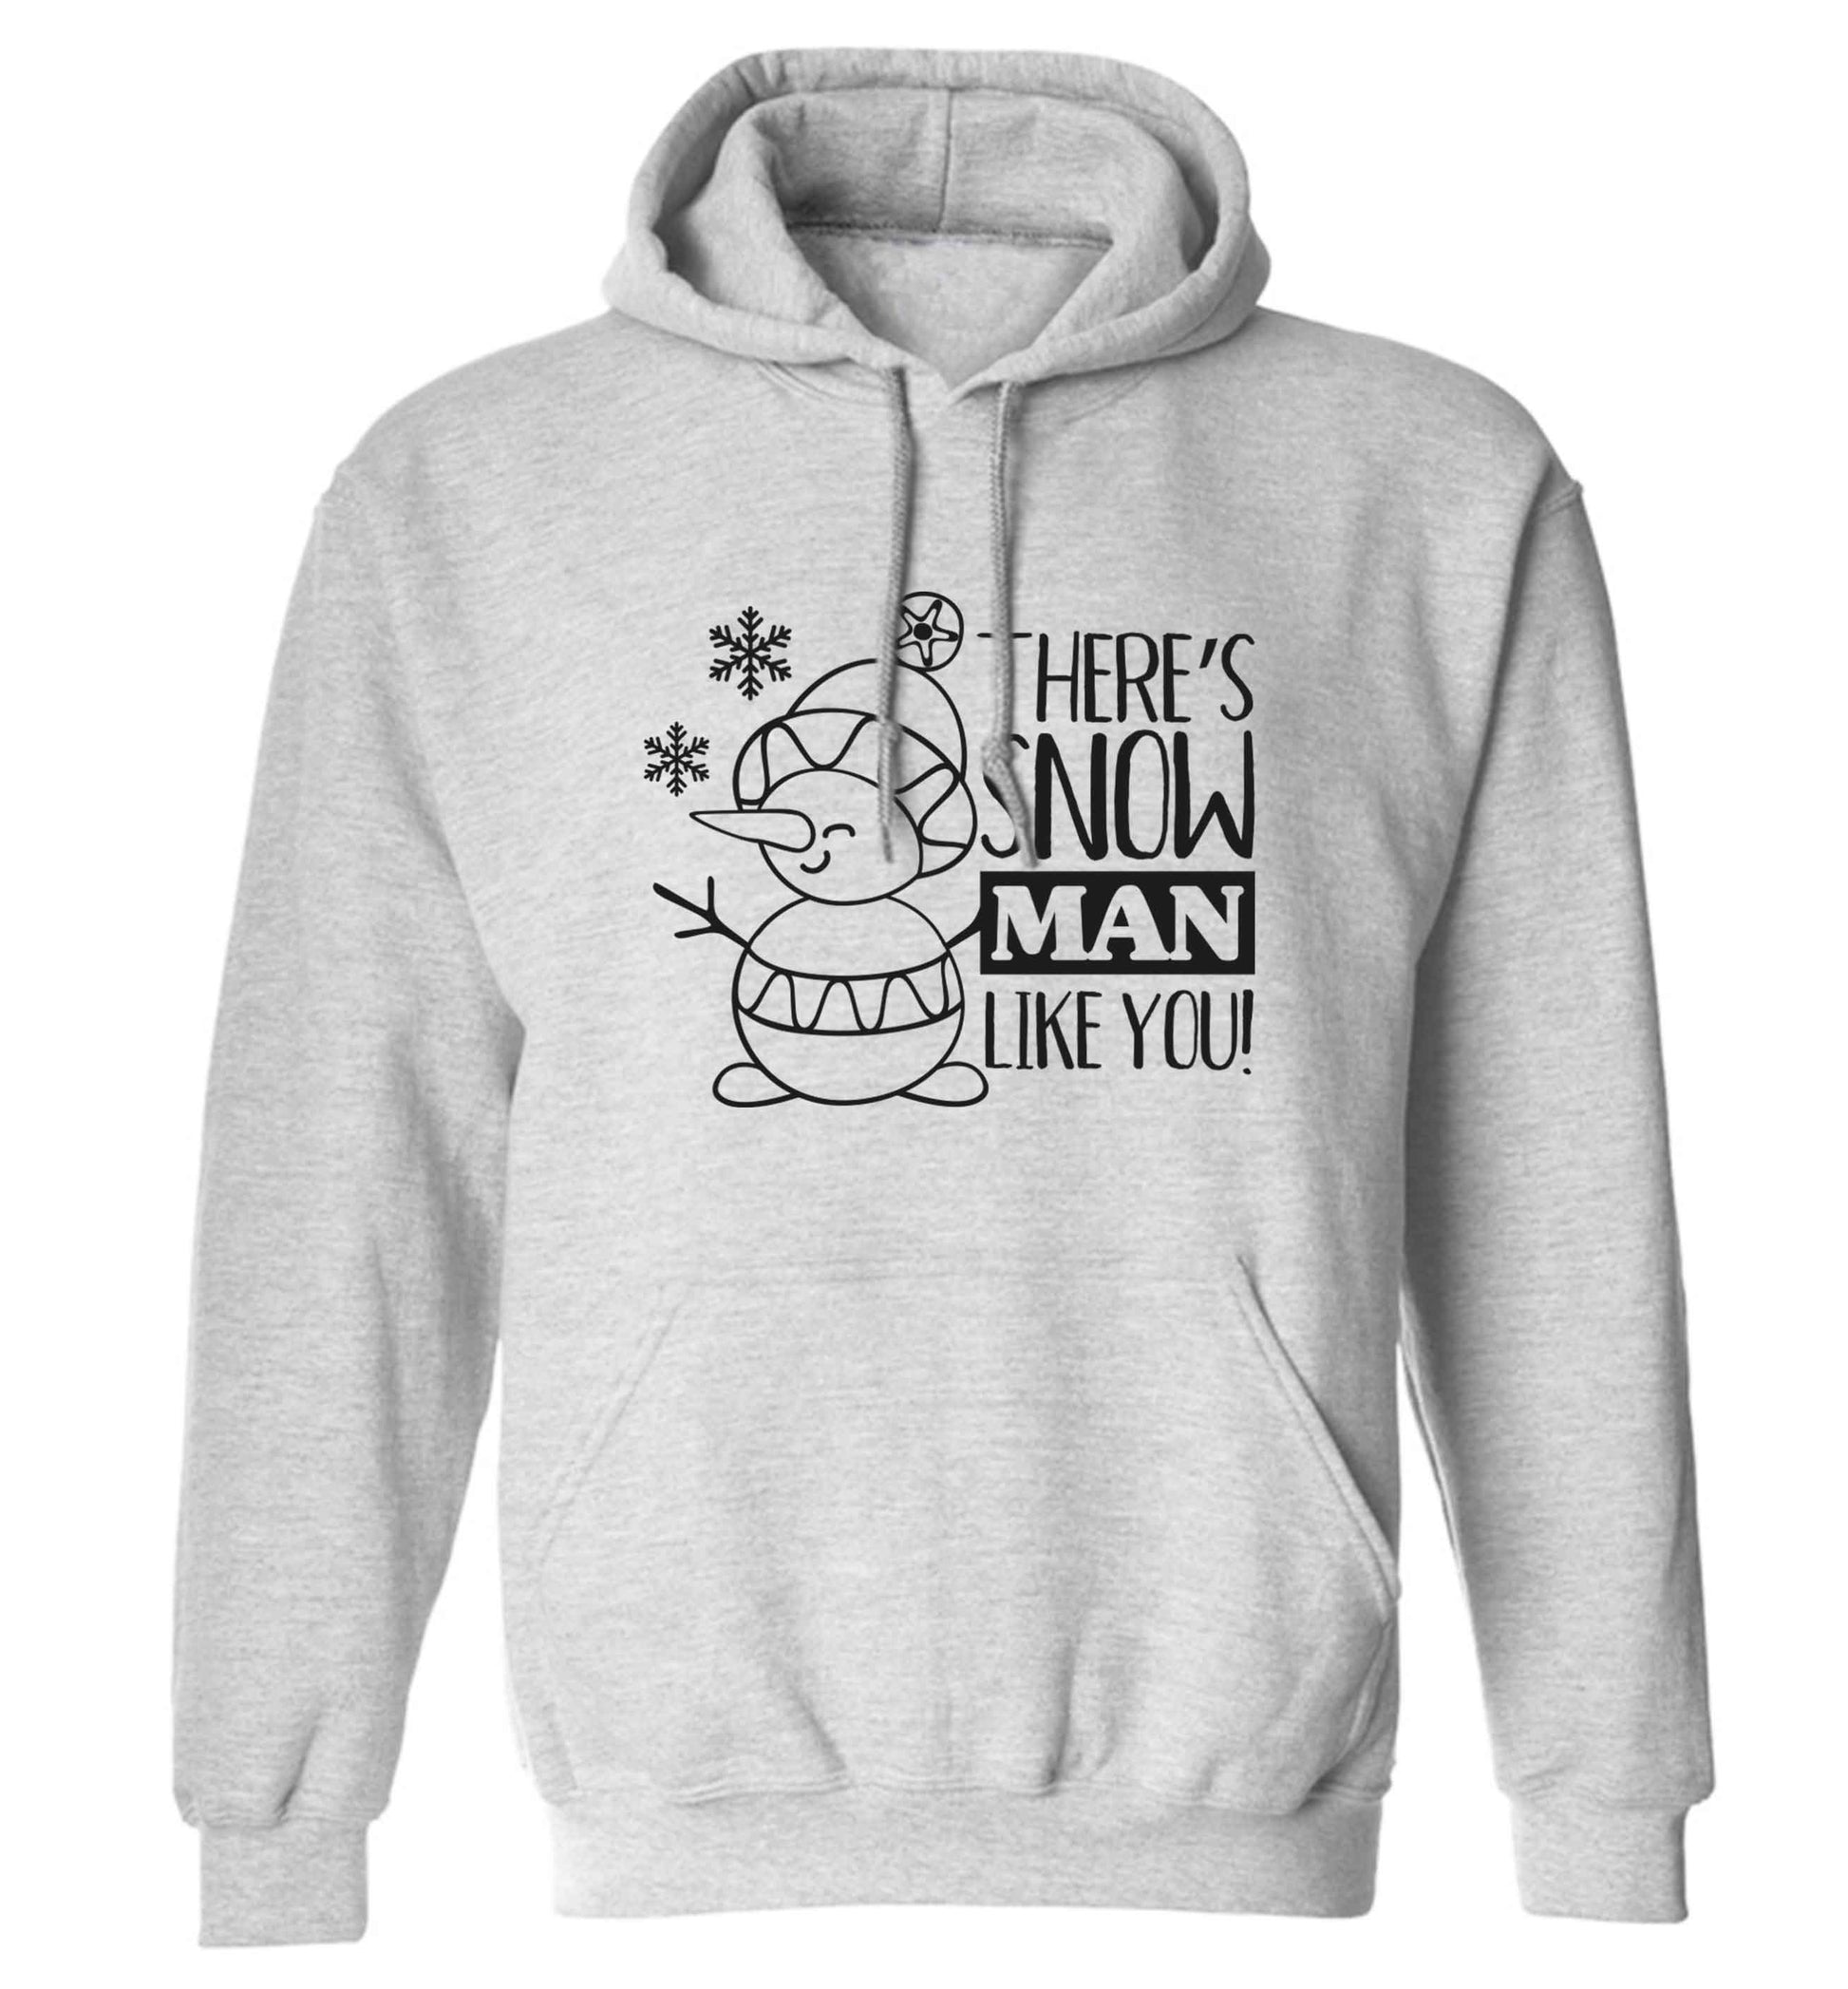 There's snow man like you adults unisex grey hoodie 2XL